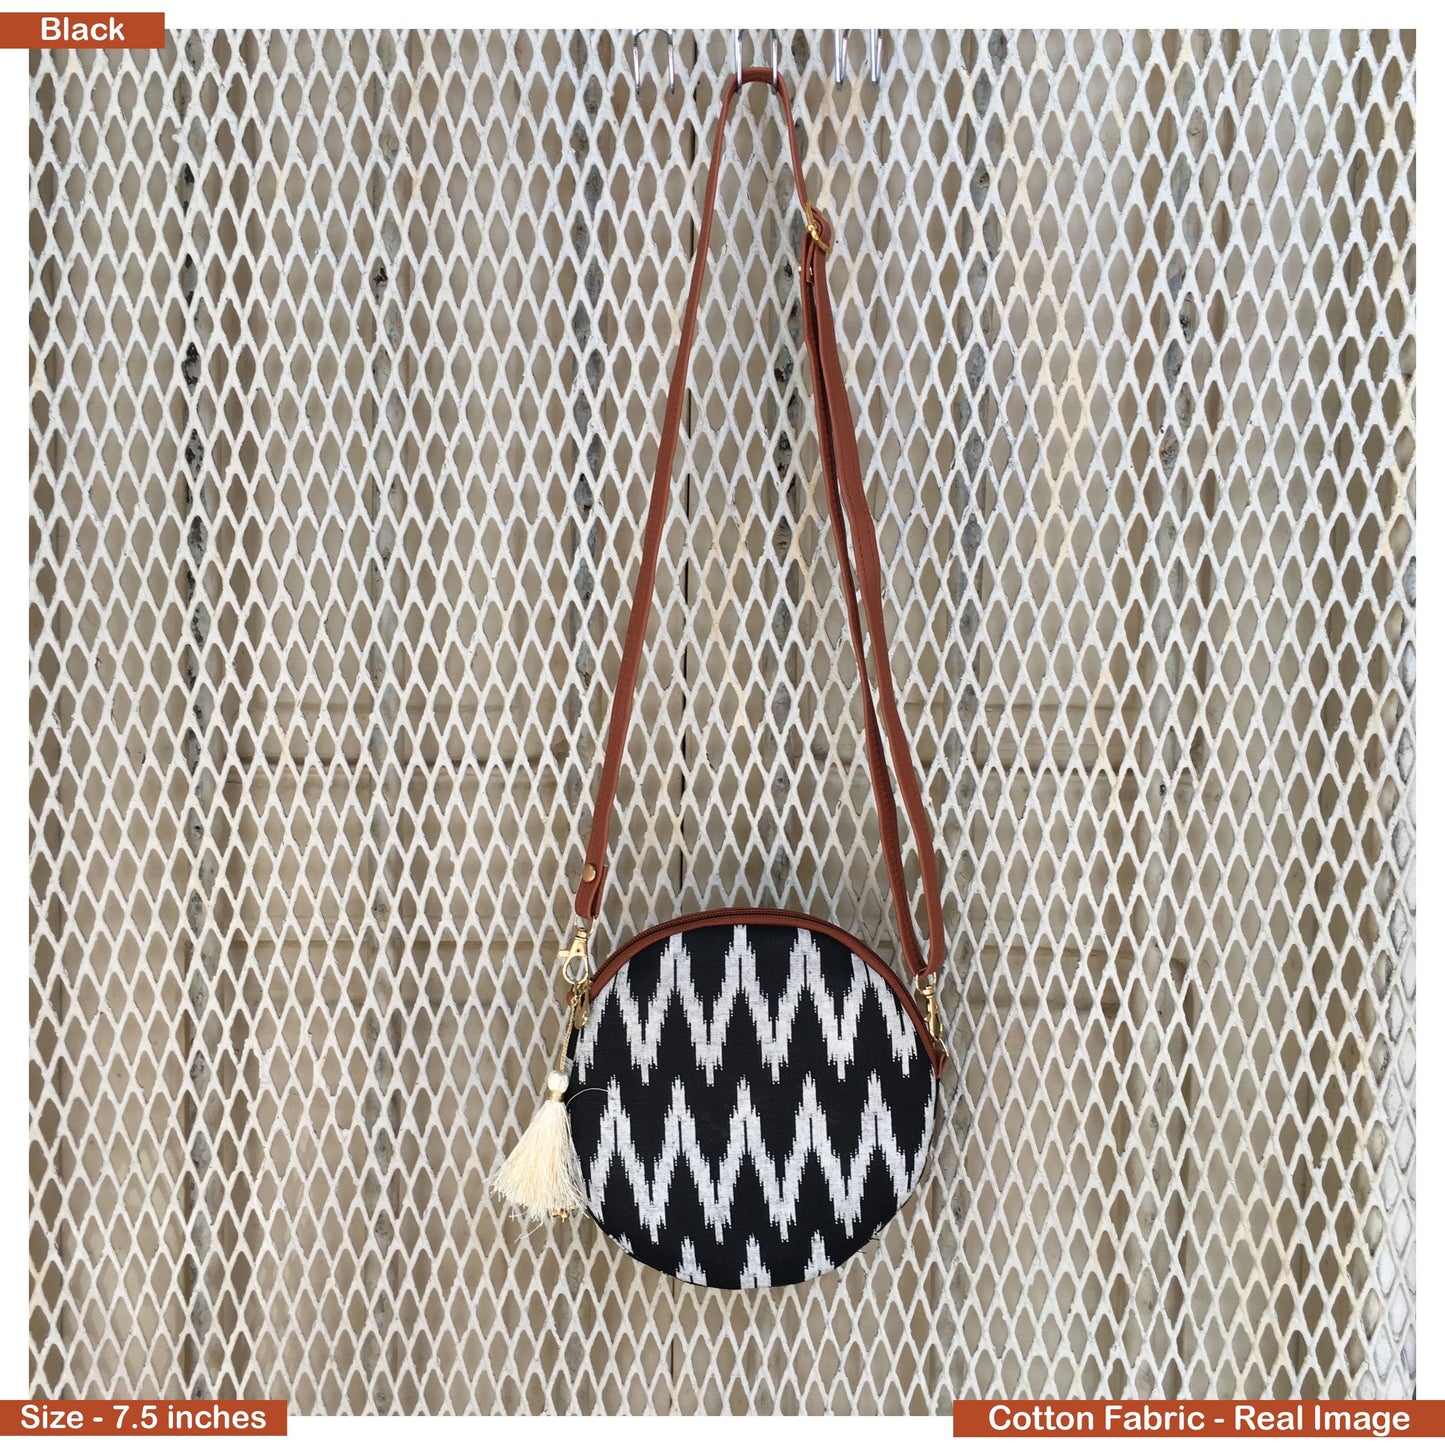 Black ZigZag Cute Round Sling - Small Size